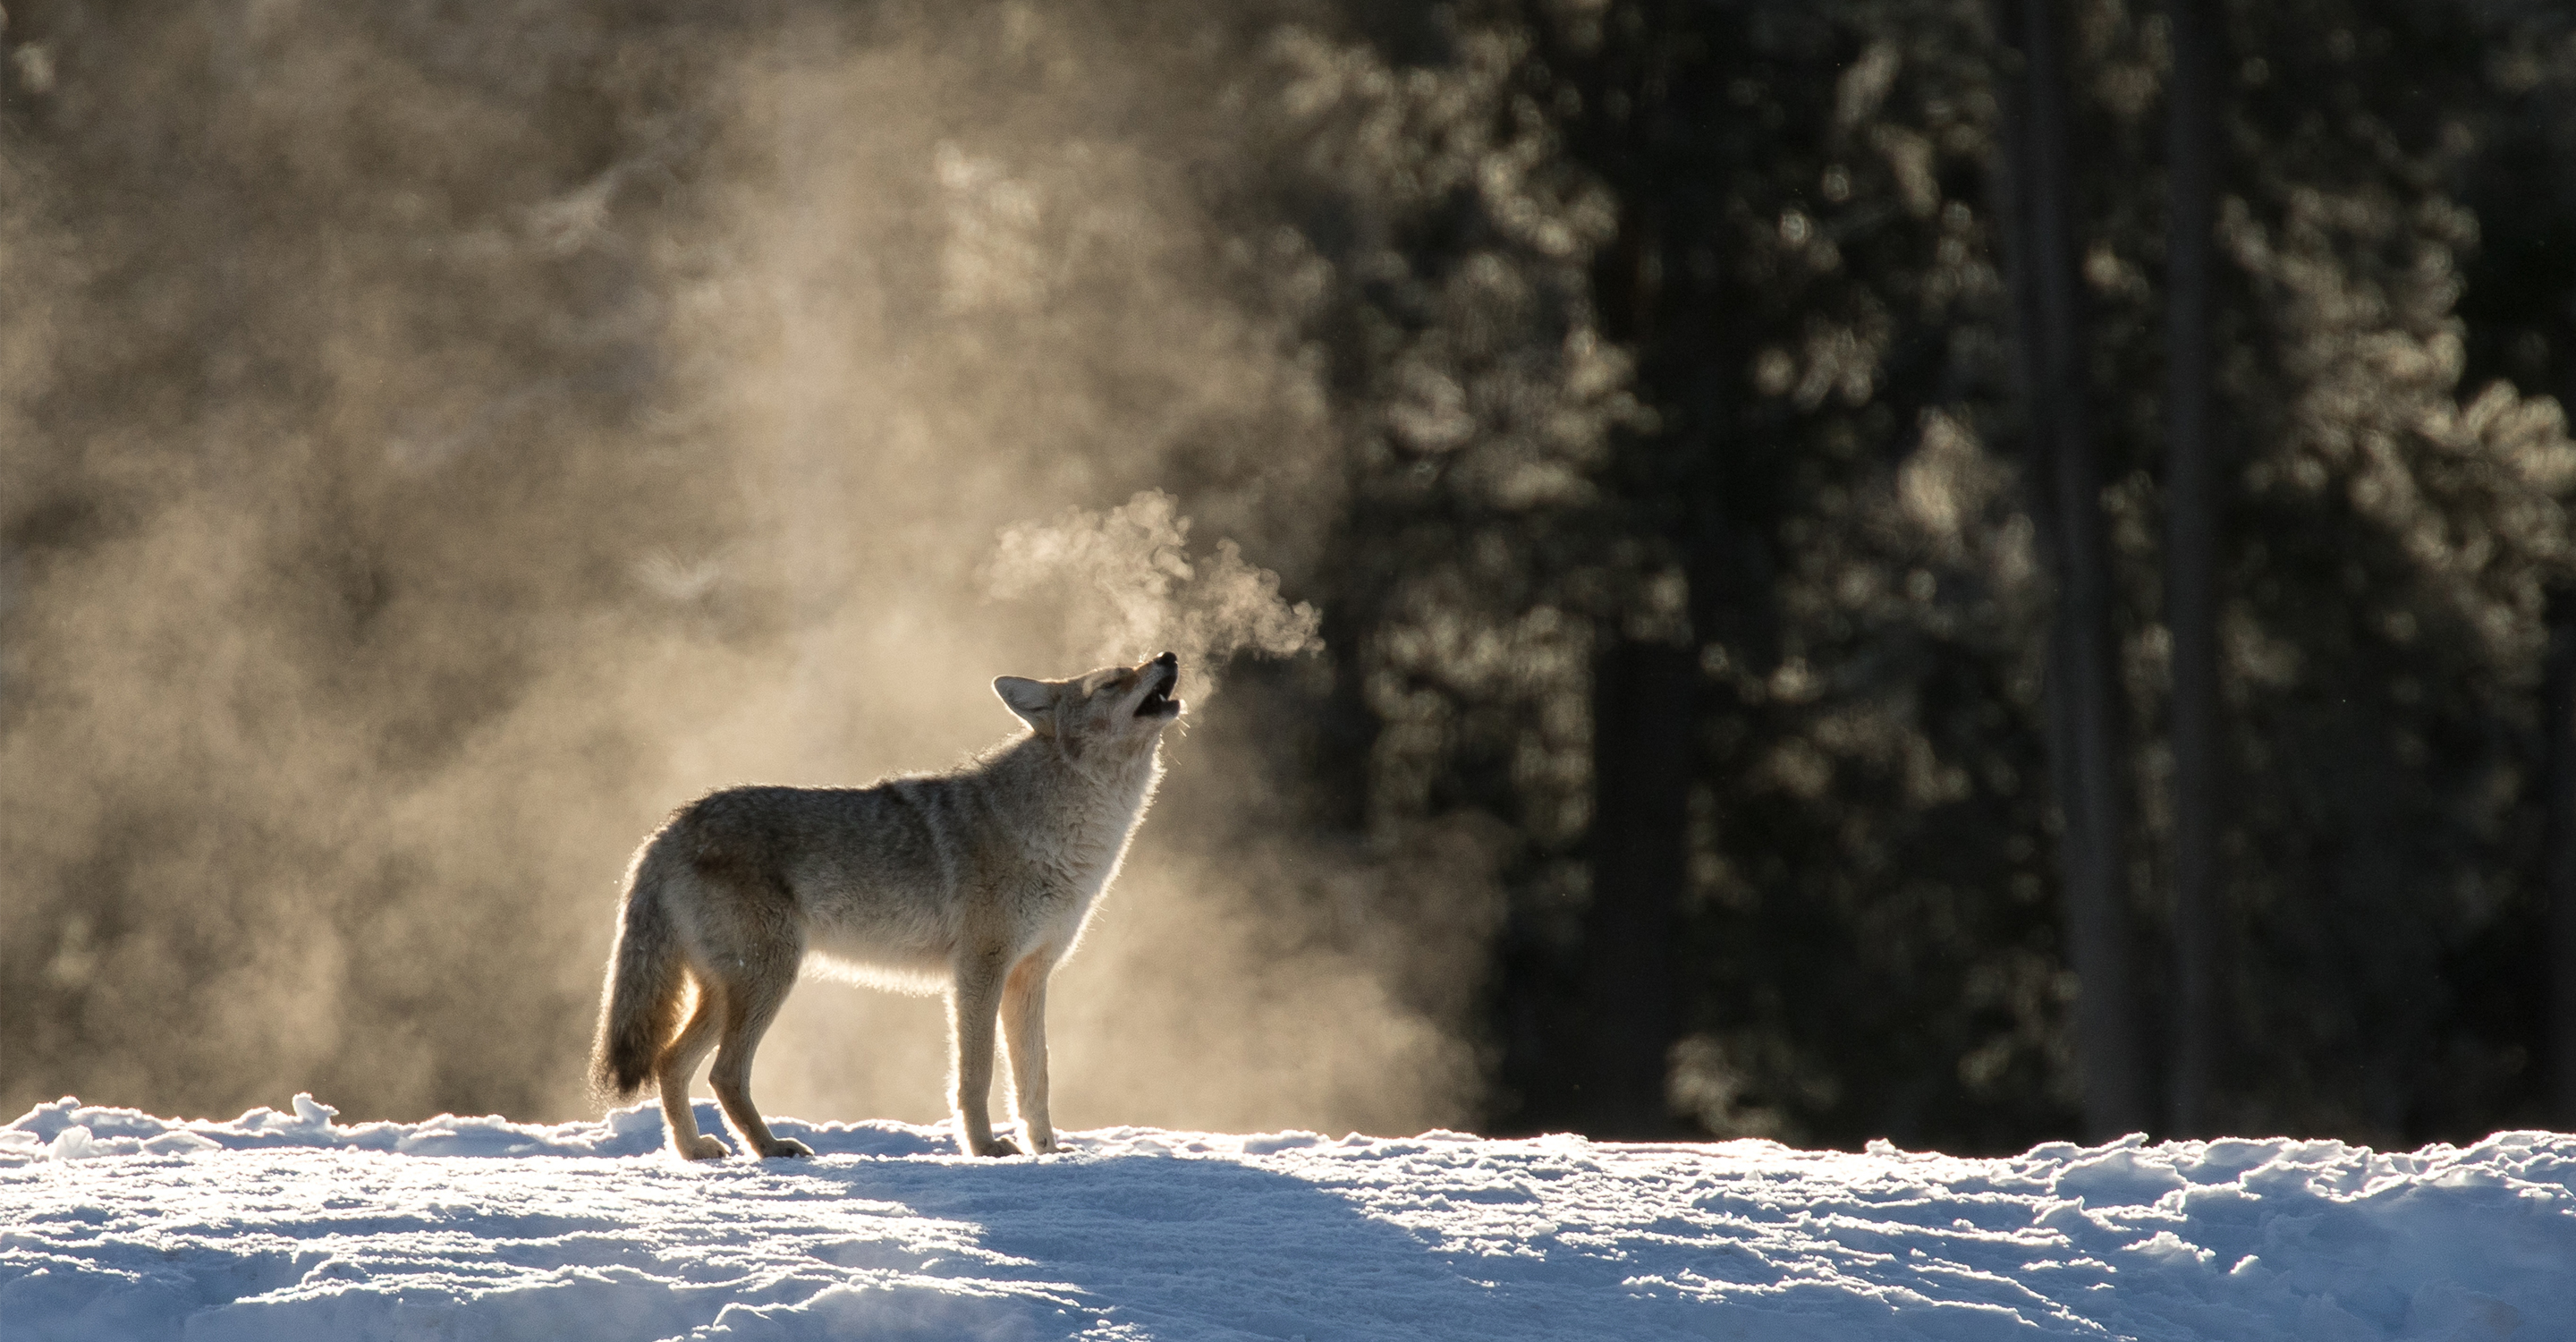 A coyote howls in the snow in Yellowstone National Park, United States